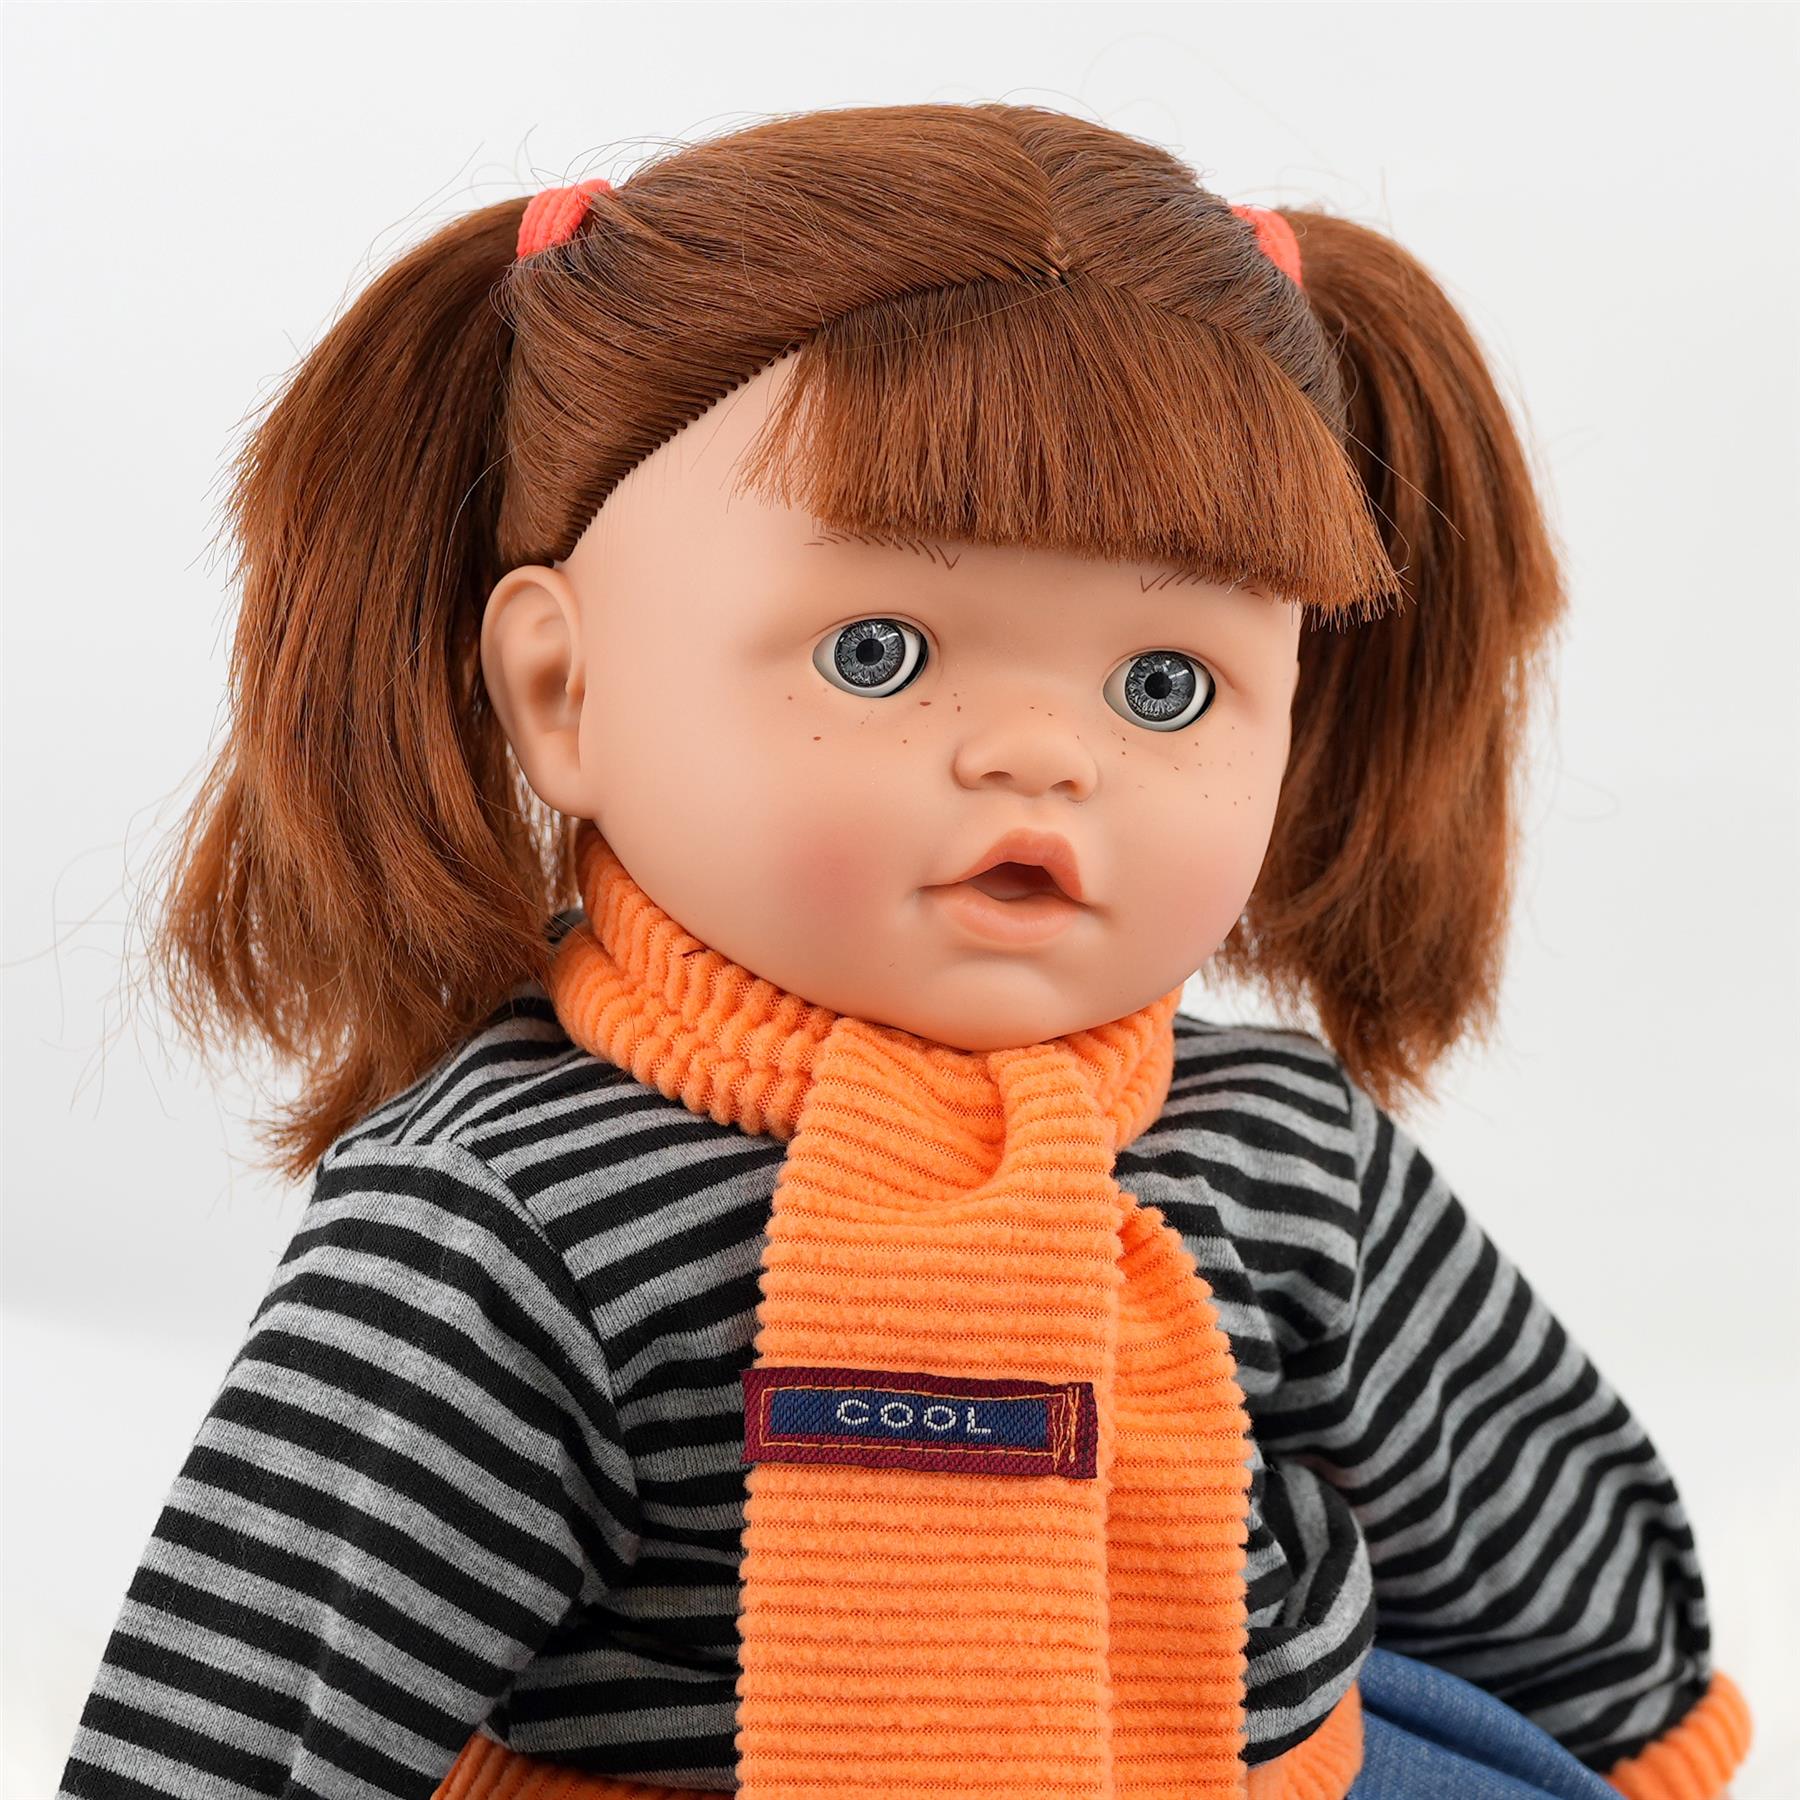 Sleeping Ginger Girl Dolls with Dummy & Sounds by BiBi Doll - The Magic Toy Shop